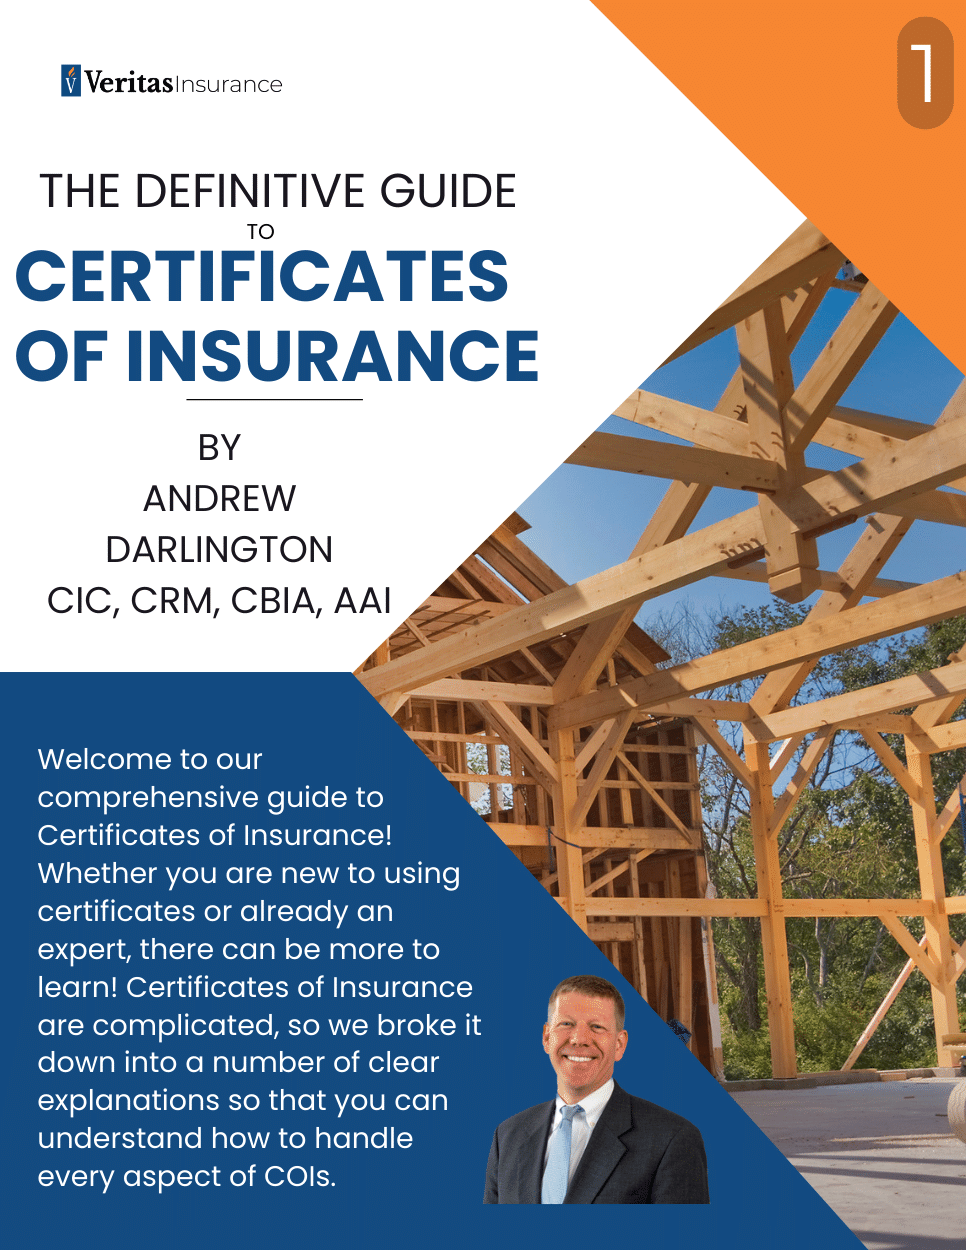 The Definitive Guide to Certificates of Insurance ebook Cover